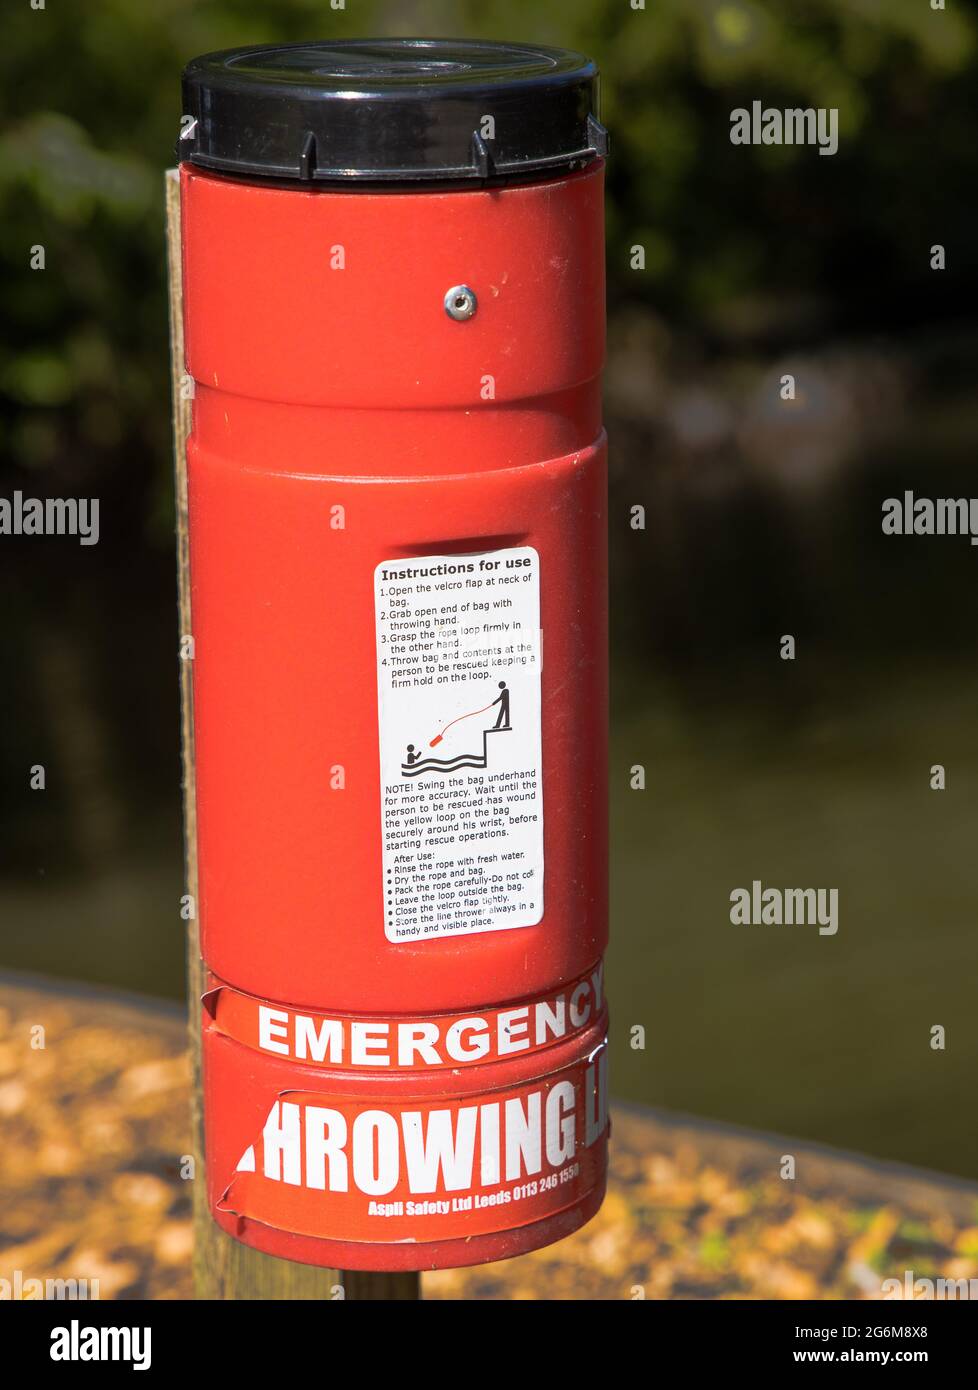 A red canister container holding a water safety thrown line shown diagram how the device should be used Stock Photo